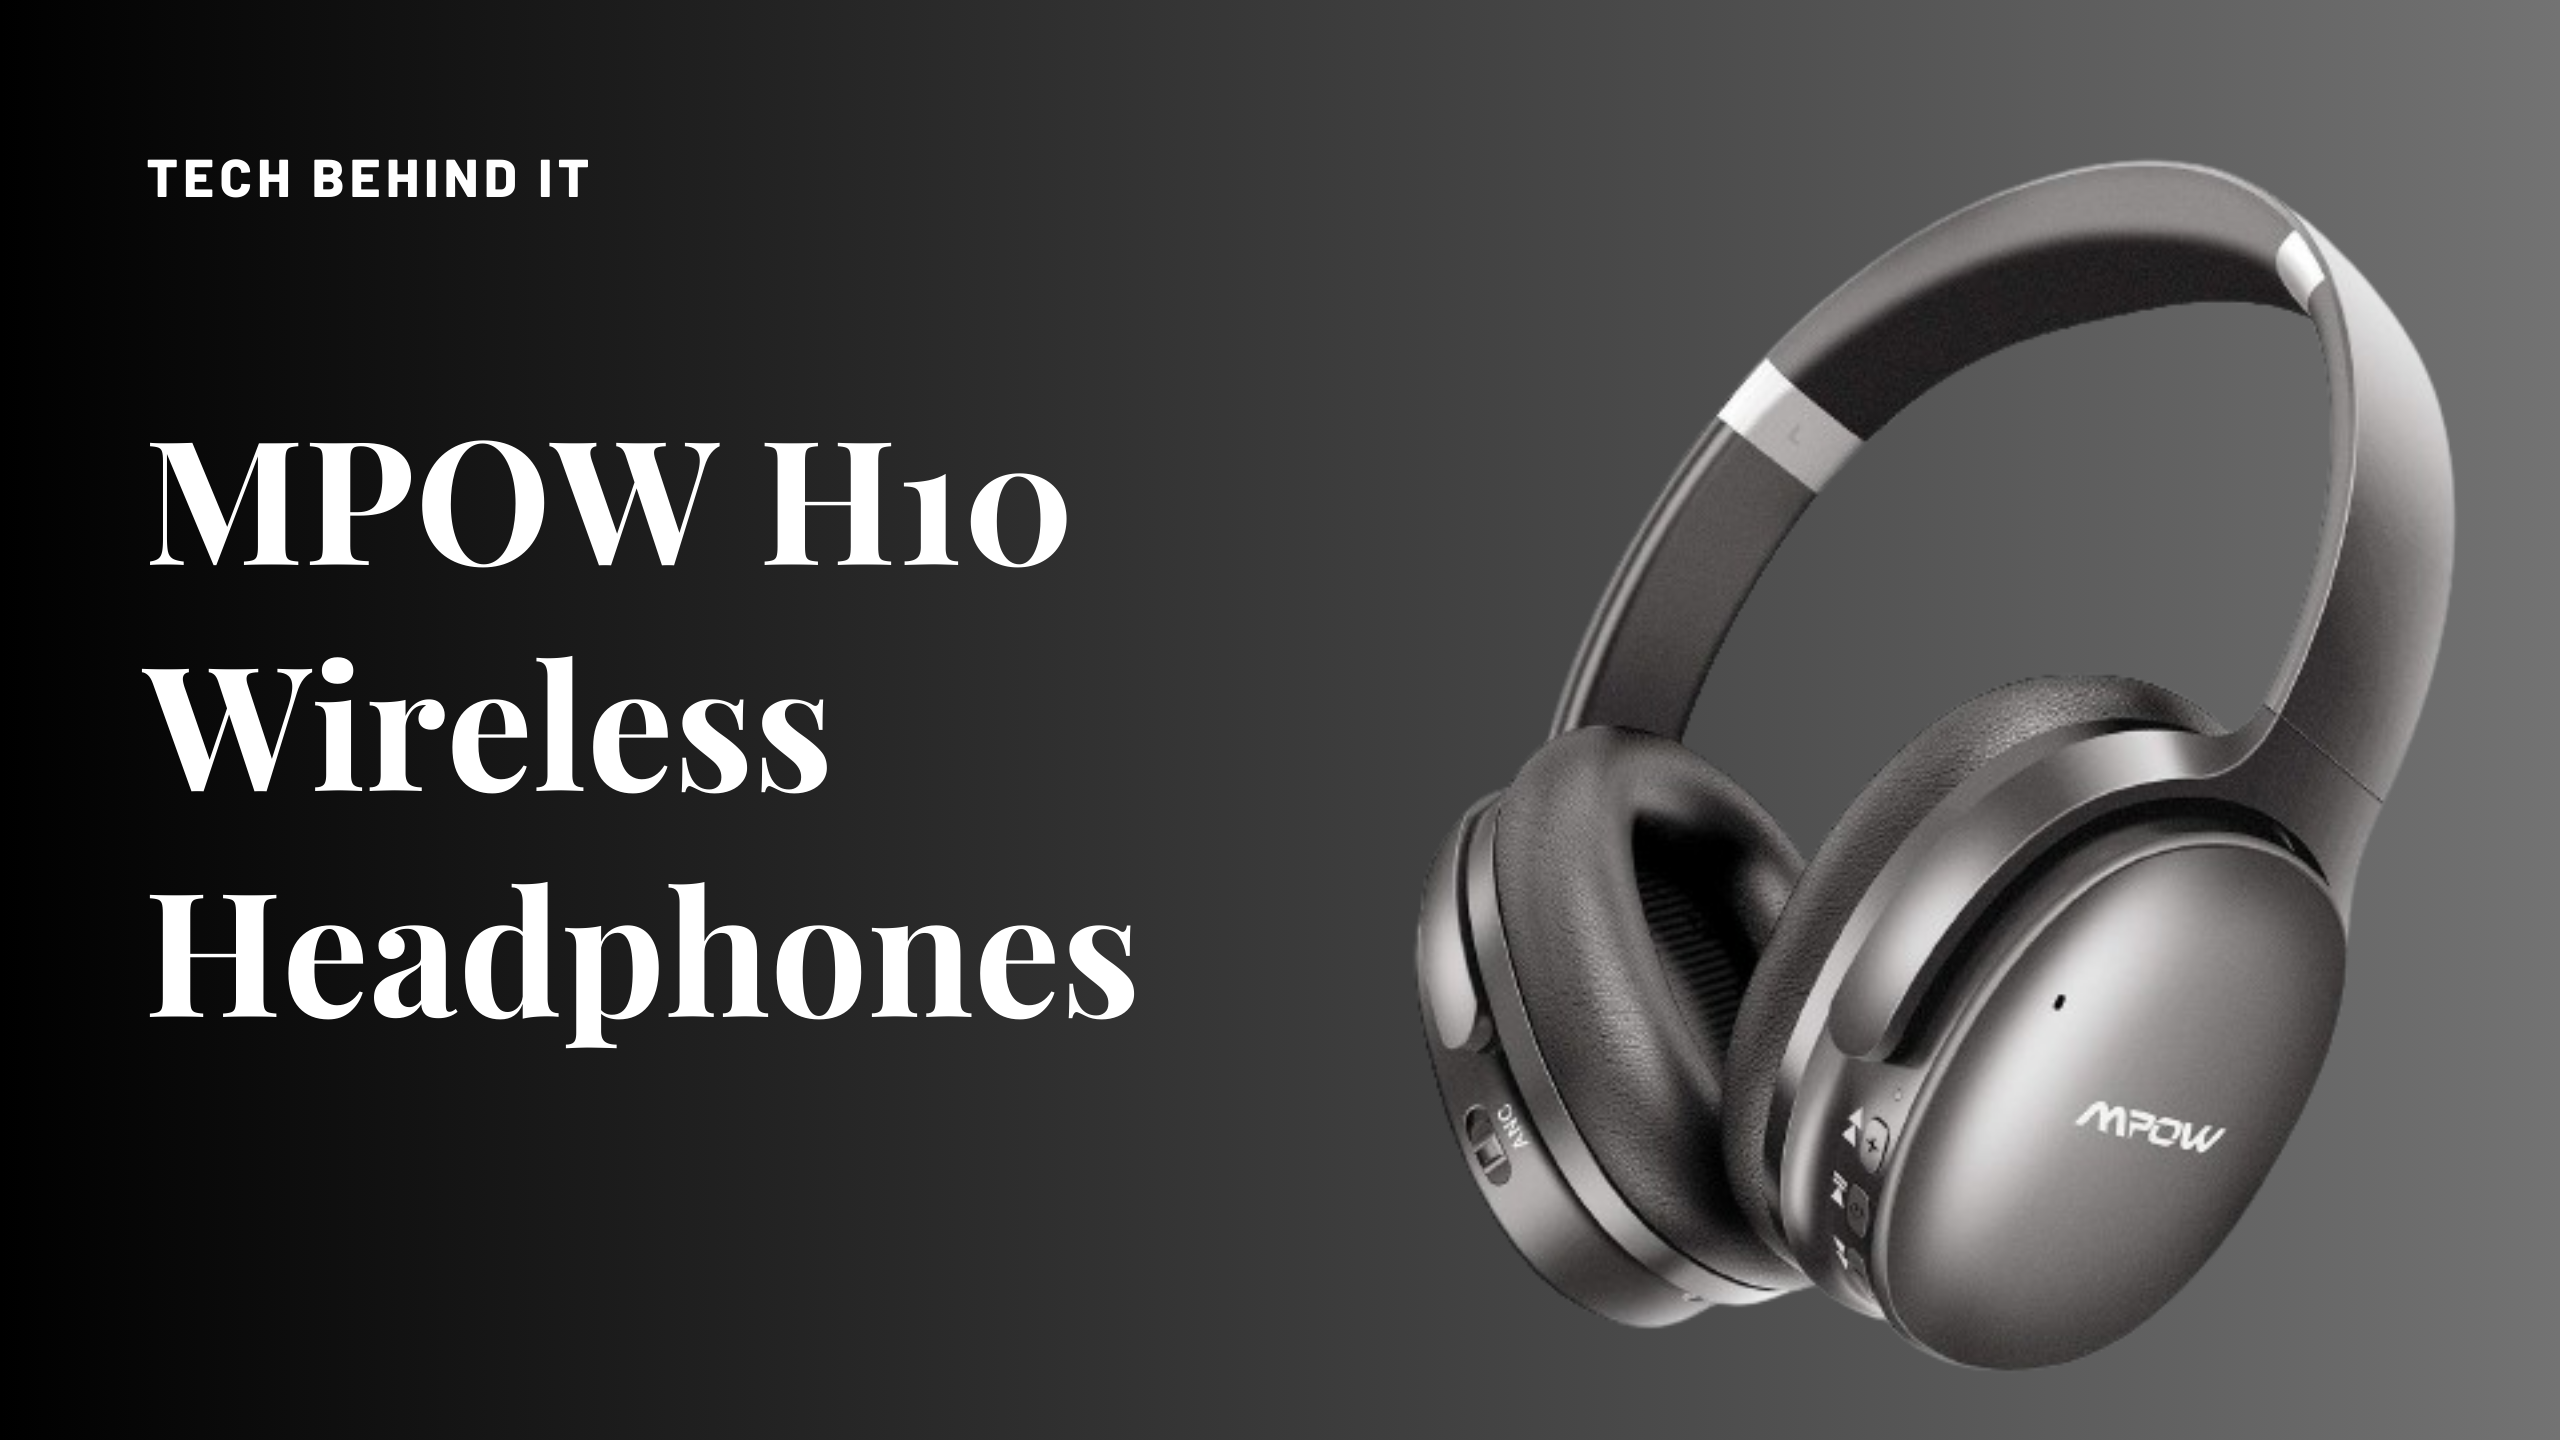 MPOW H10 Wireless Headphones – Detailed Review